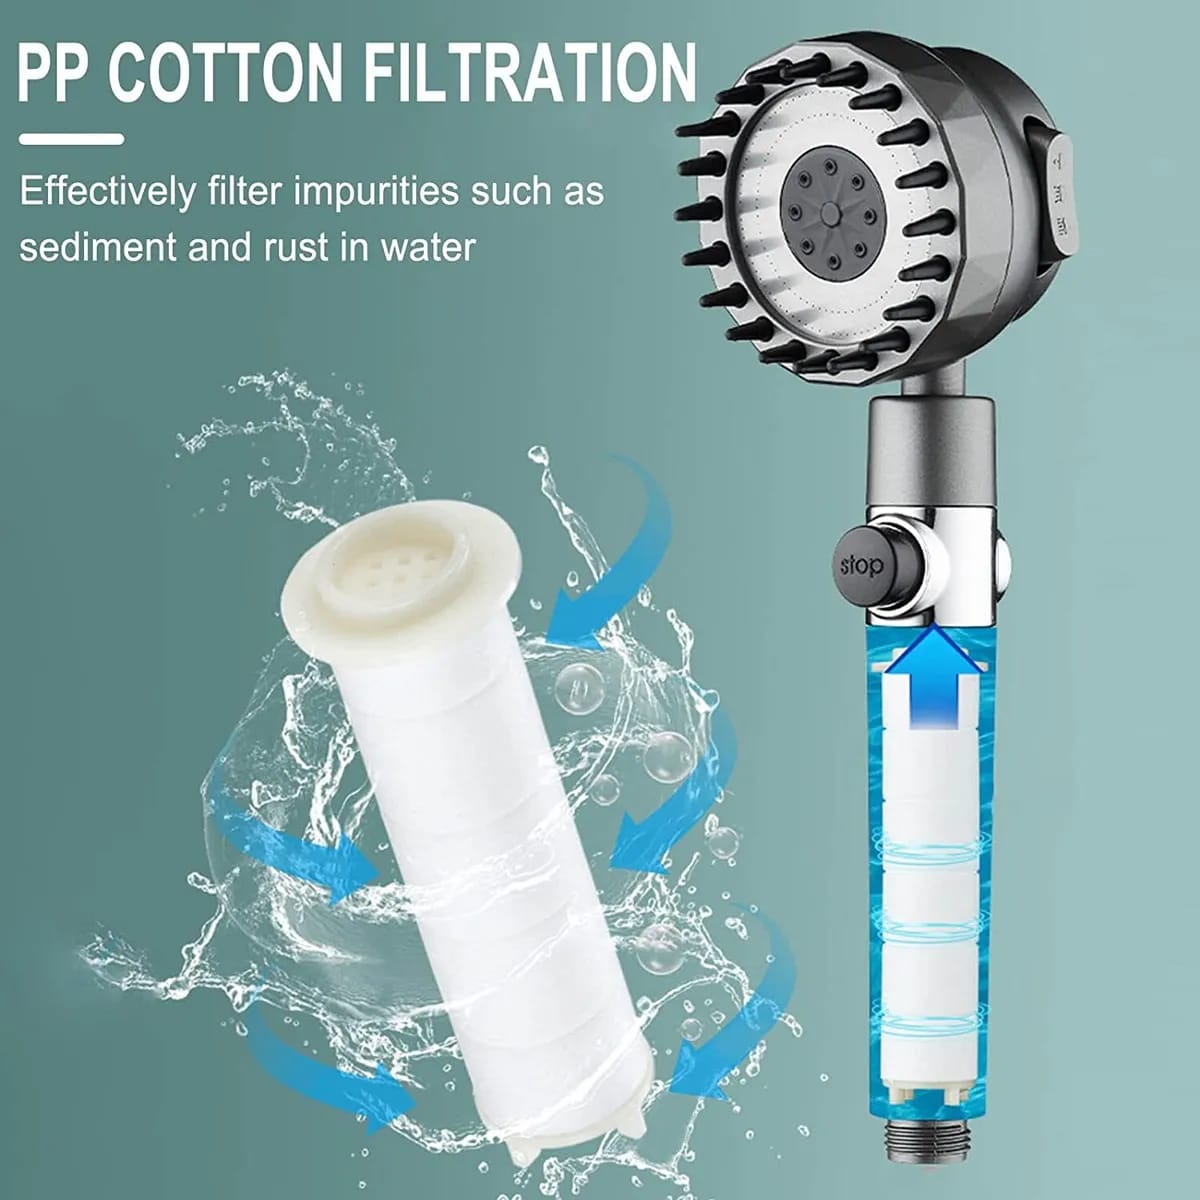 Cotton filtration of shower head.